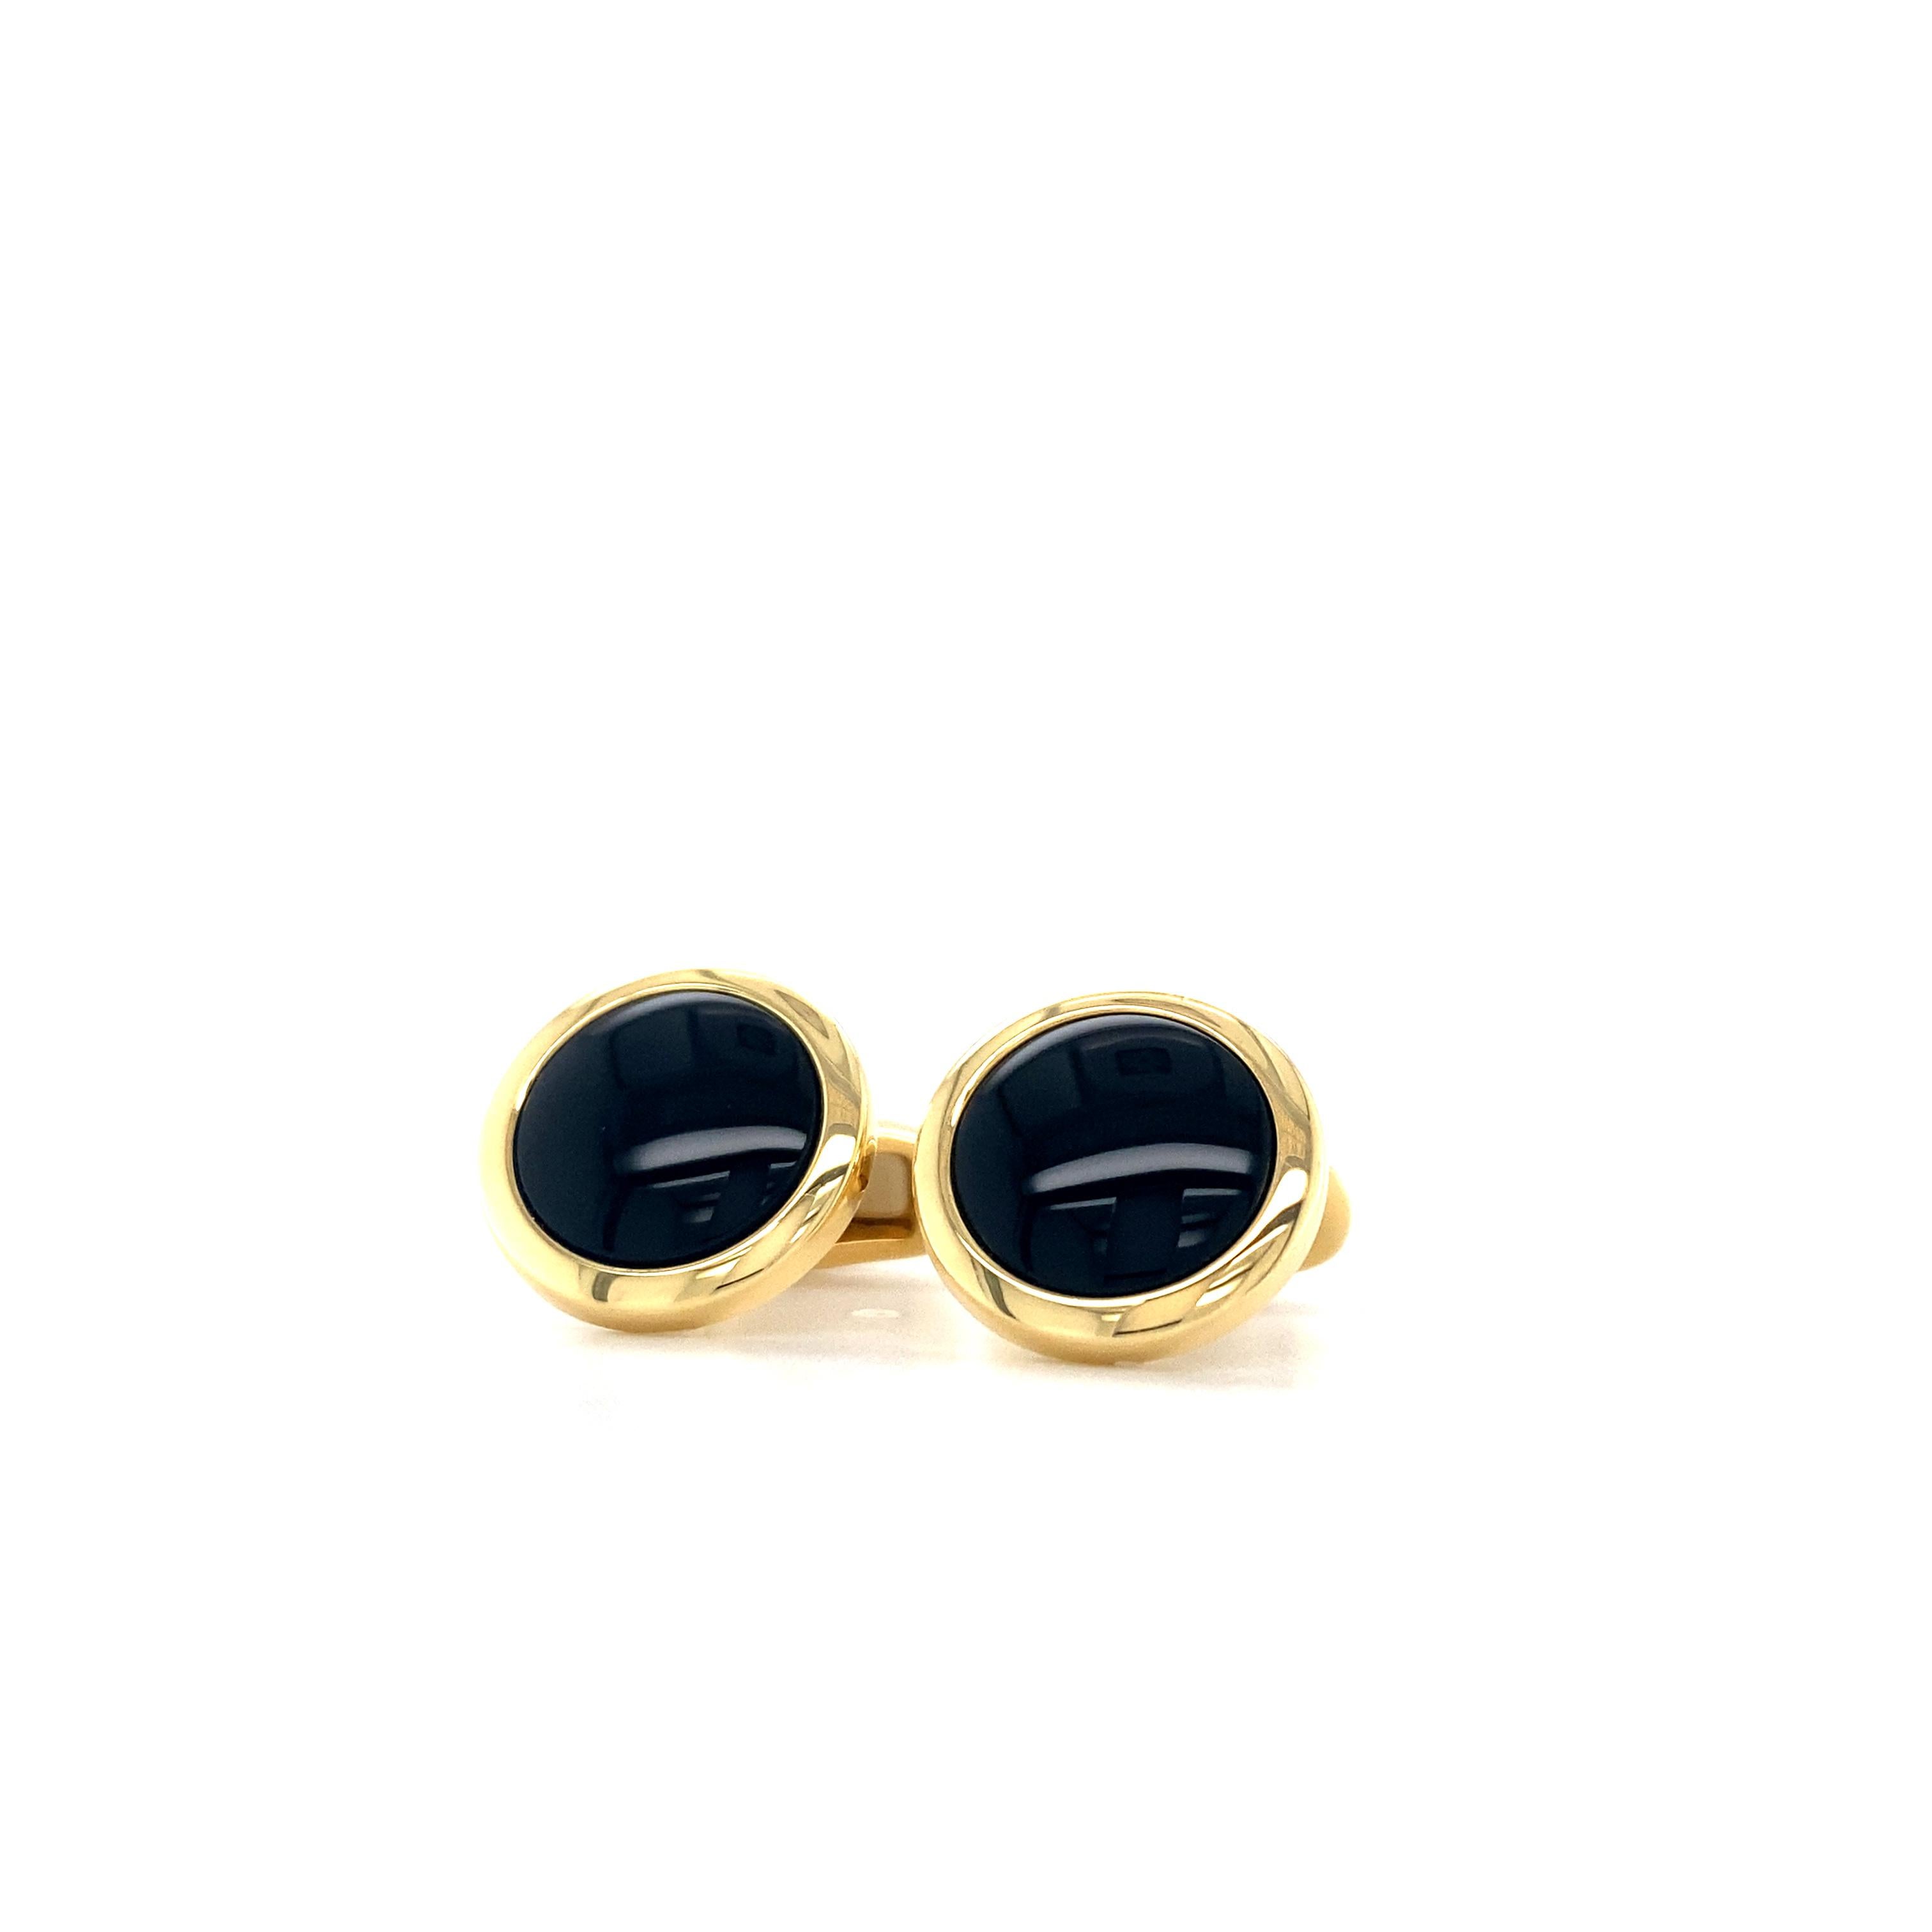 Women's or Men's Round Cufflinks with Domed Bezel, 18k Yellow Gold, Onyx Inlay For Sale